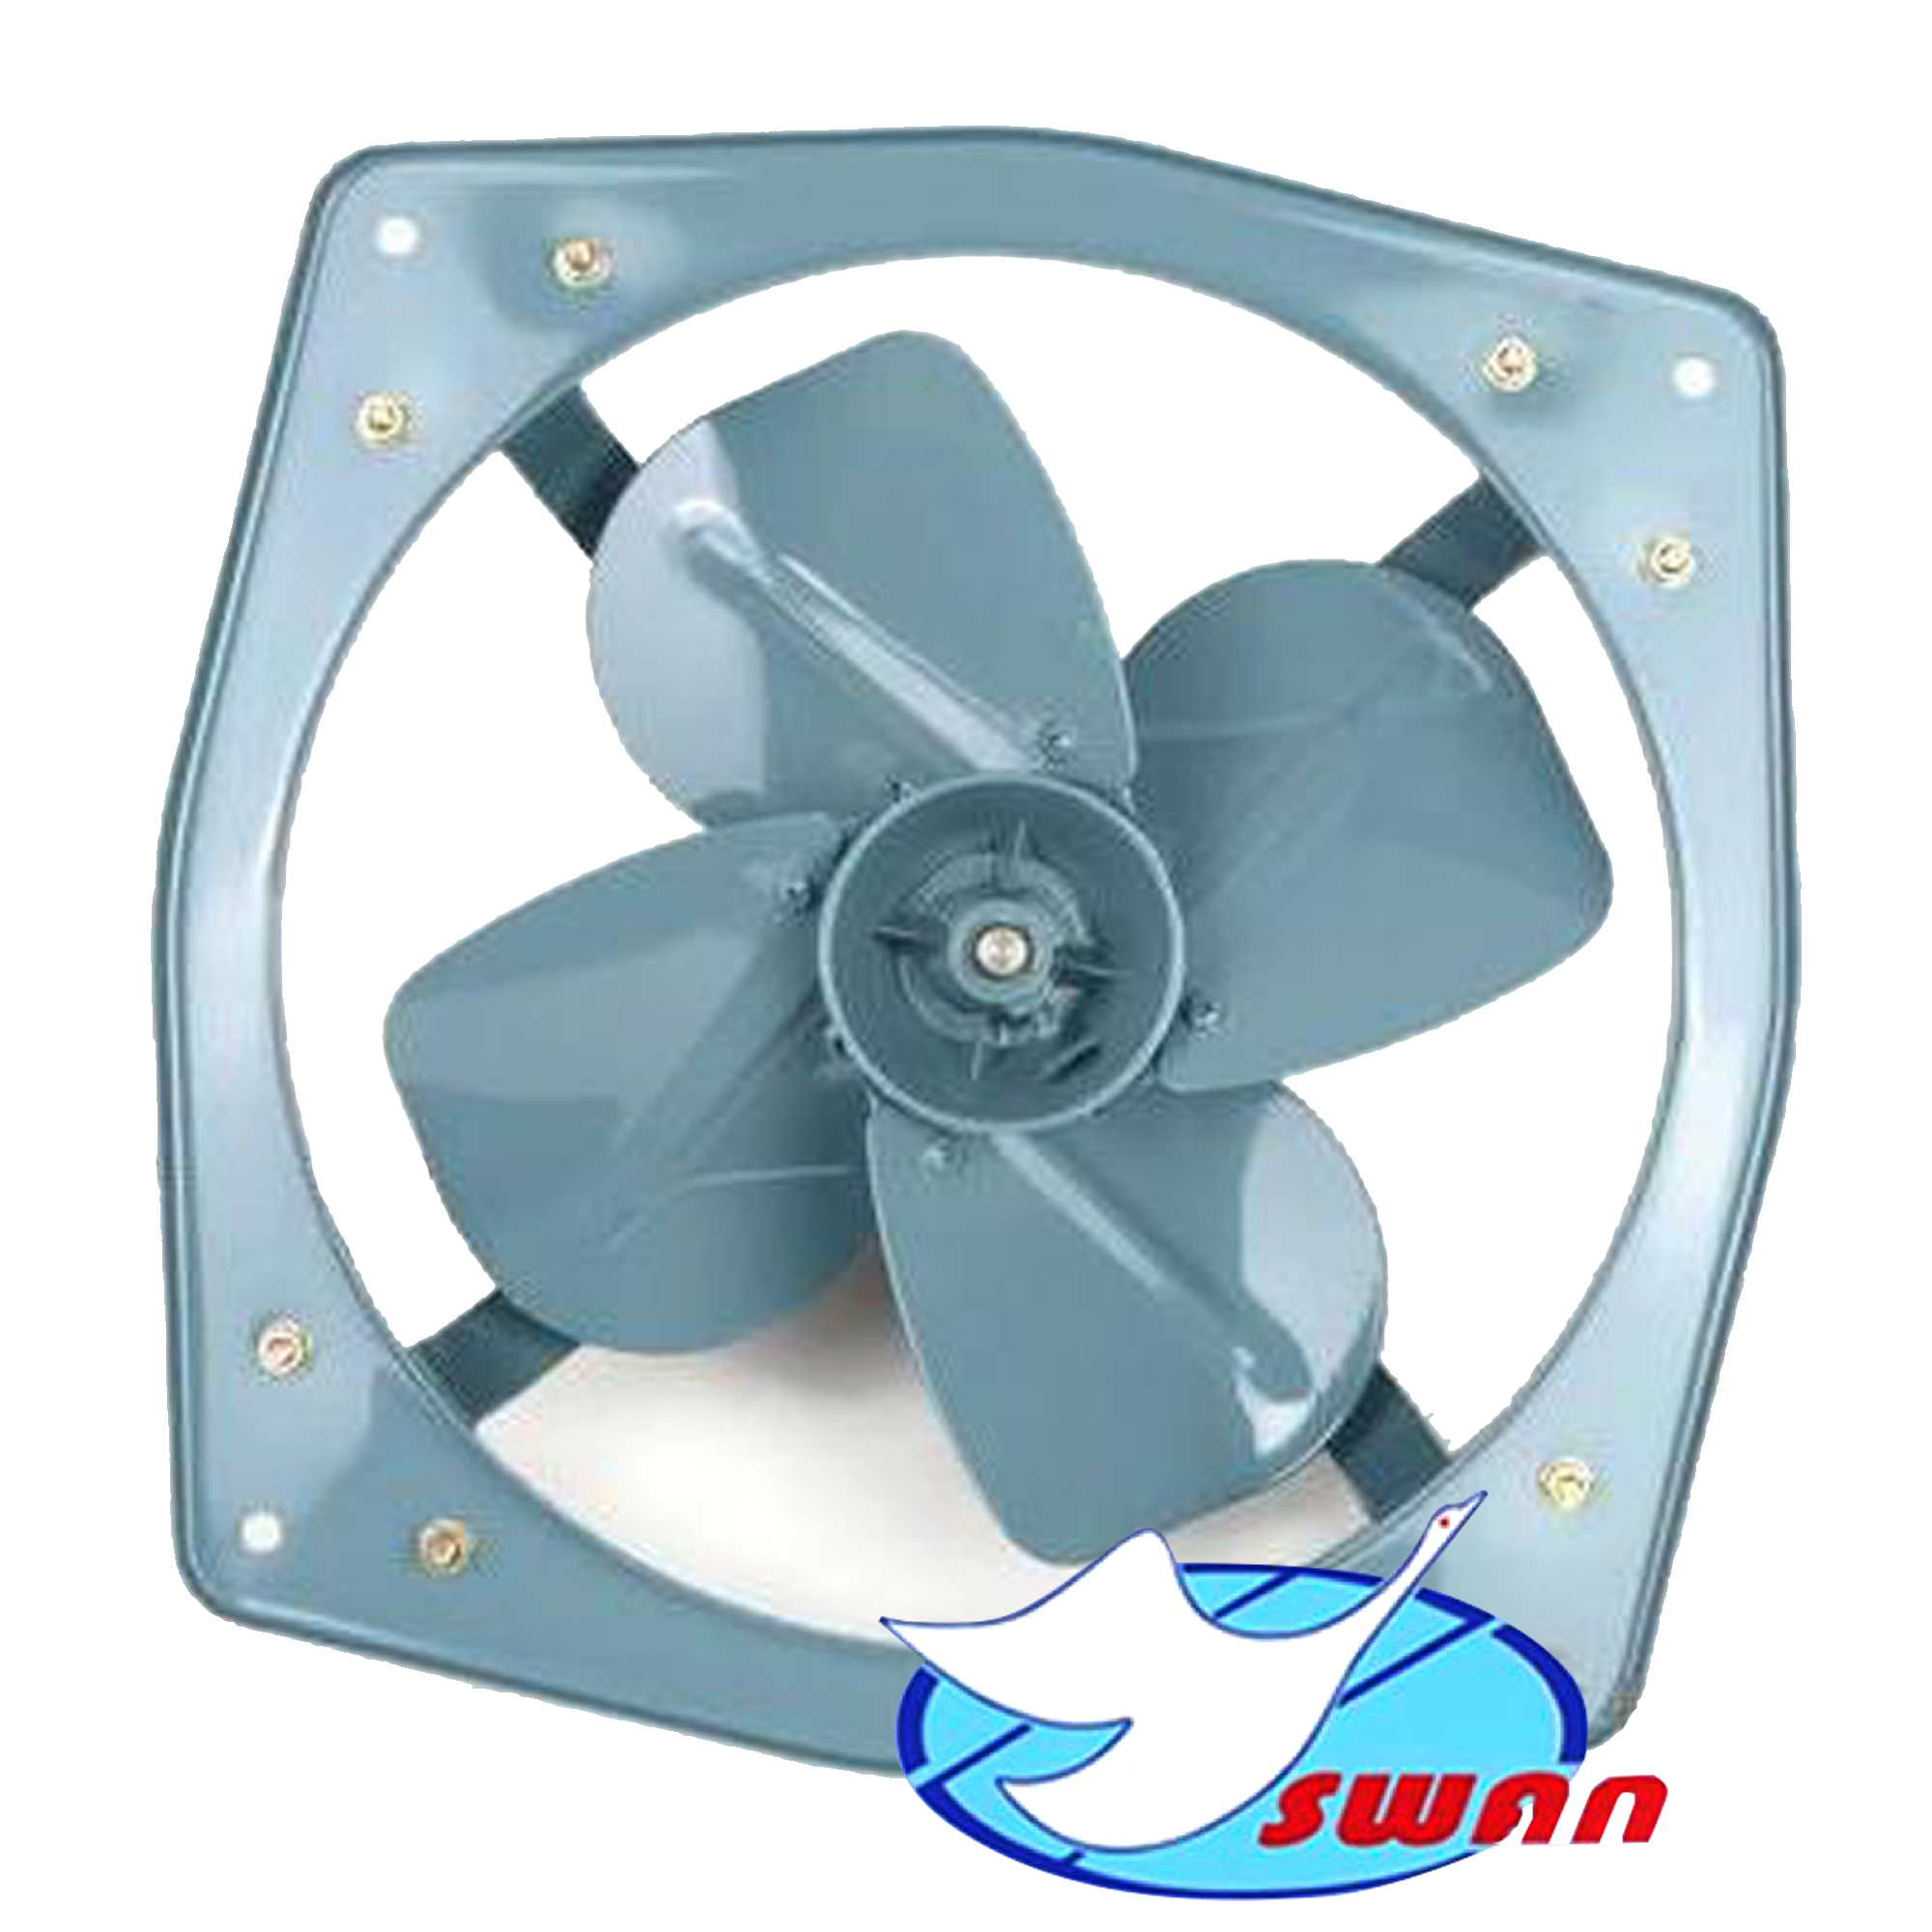 Swan Fa45ii 18450mm Air Flow 100m3min Power 380w 1phase with measurements 2000 X 2000